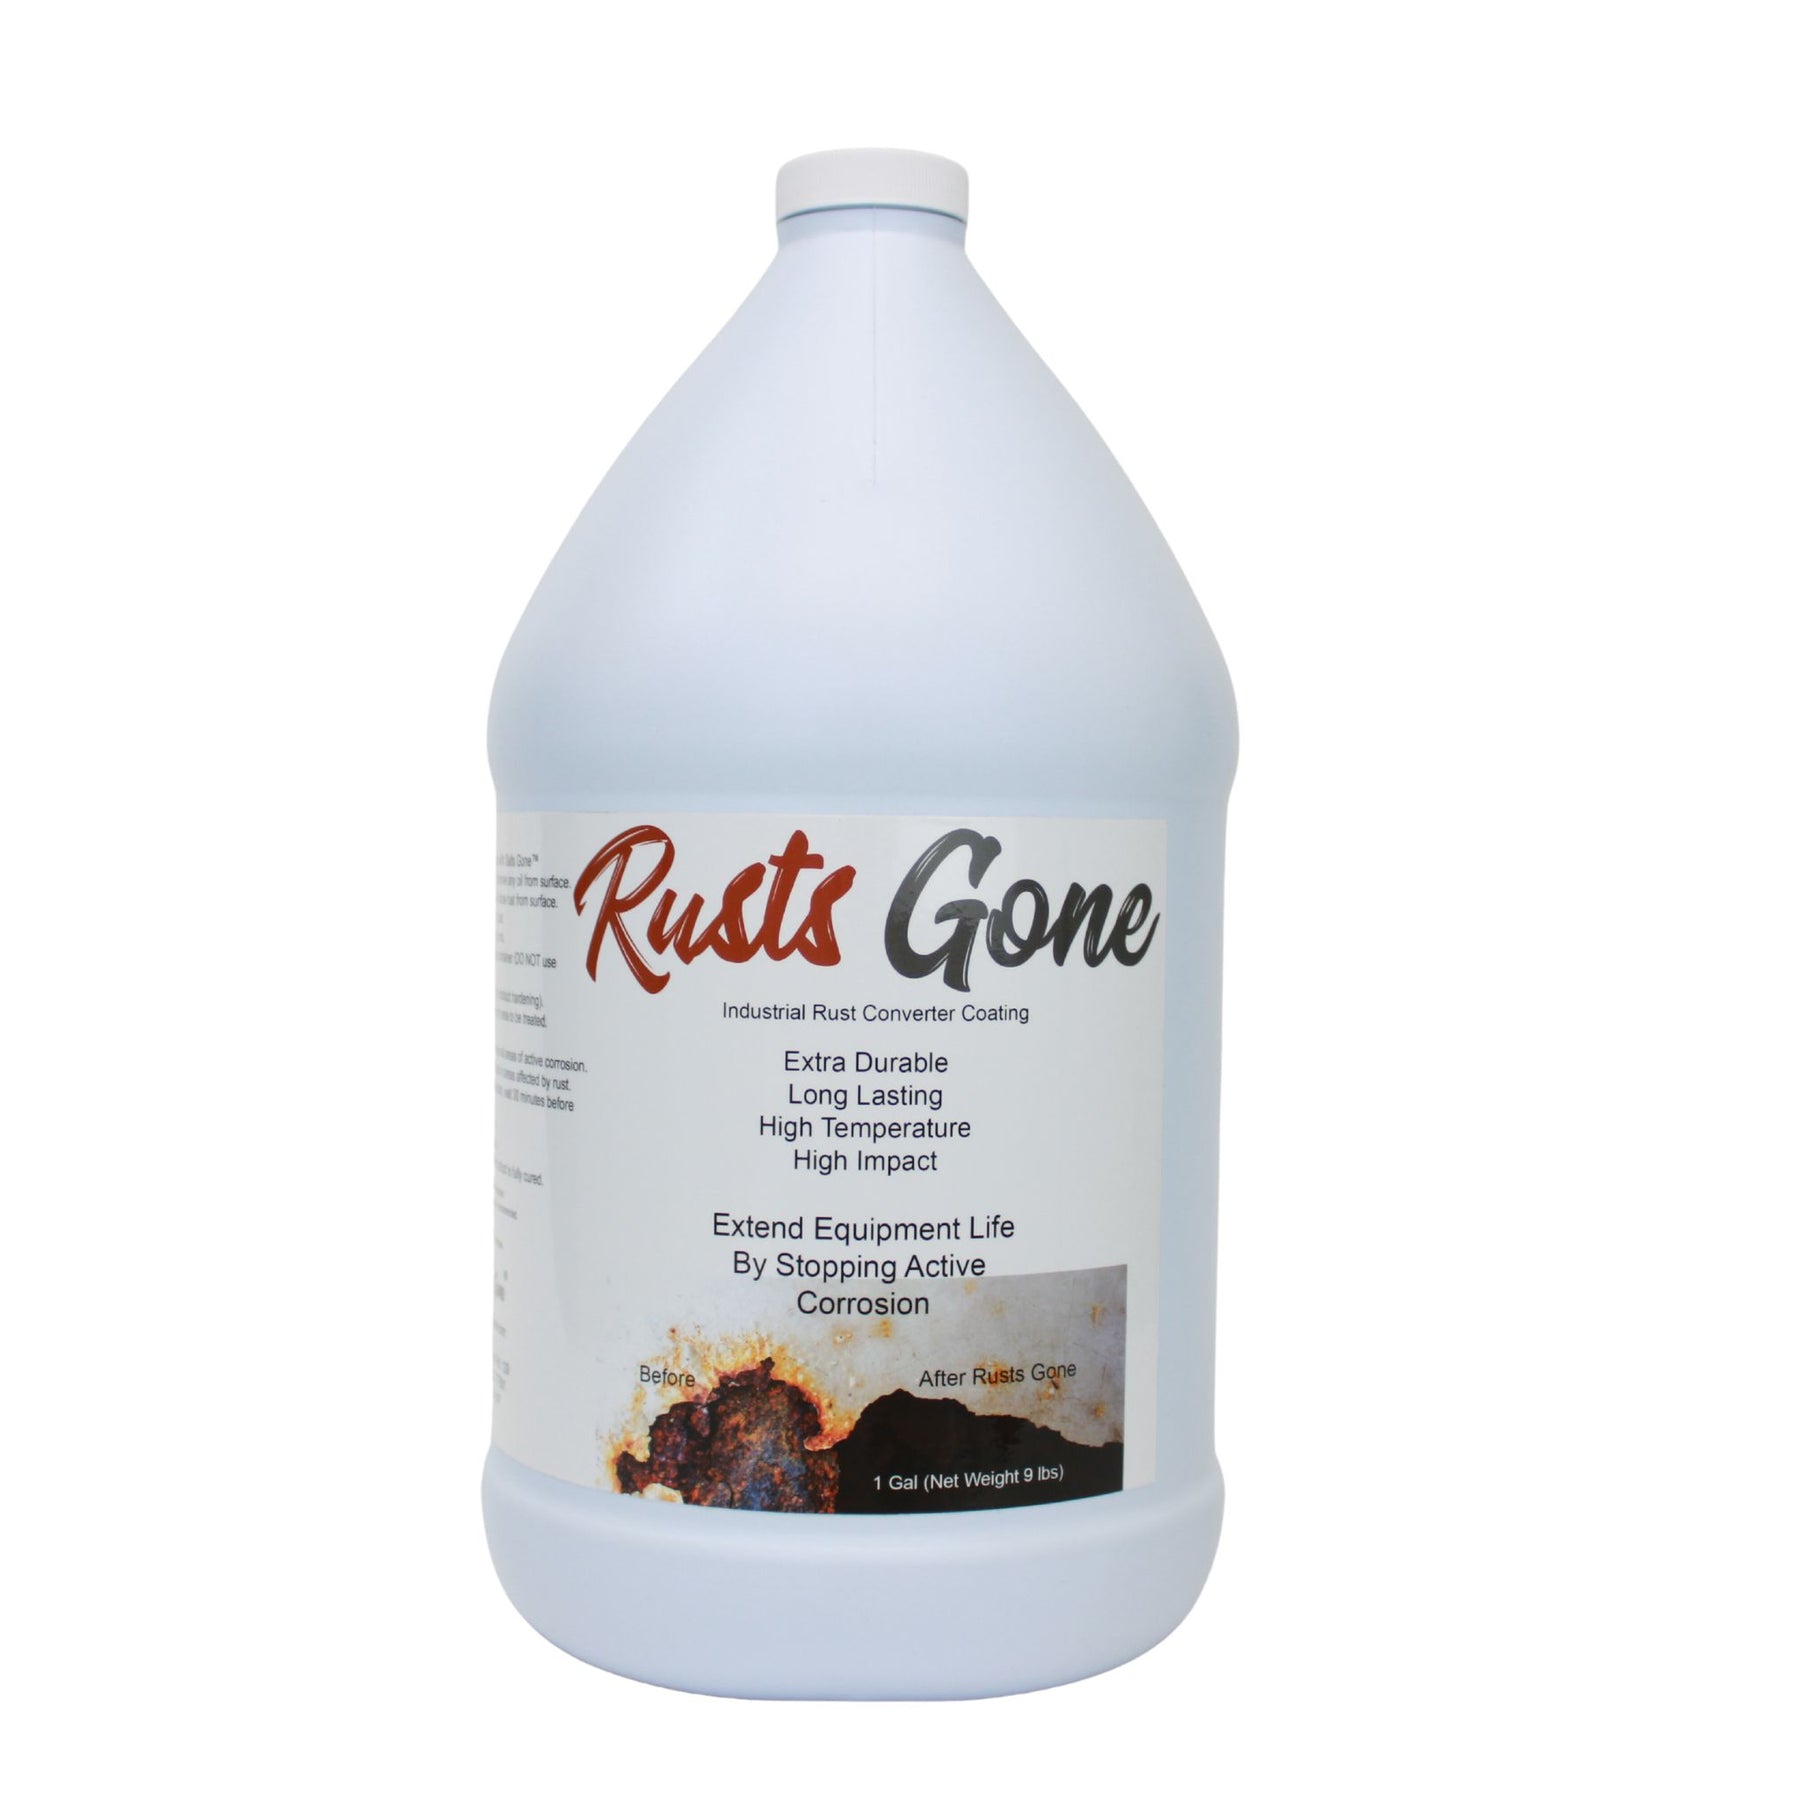 CRC Rust Remover 1 Gal